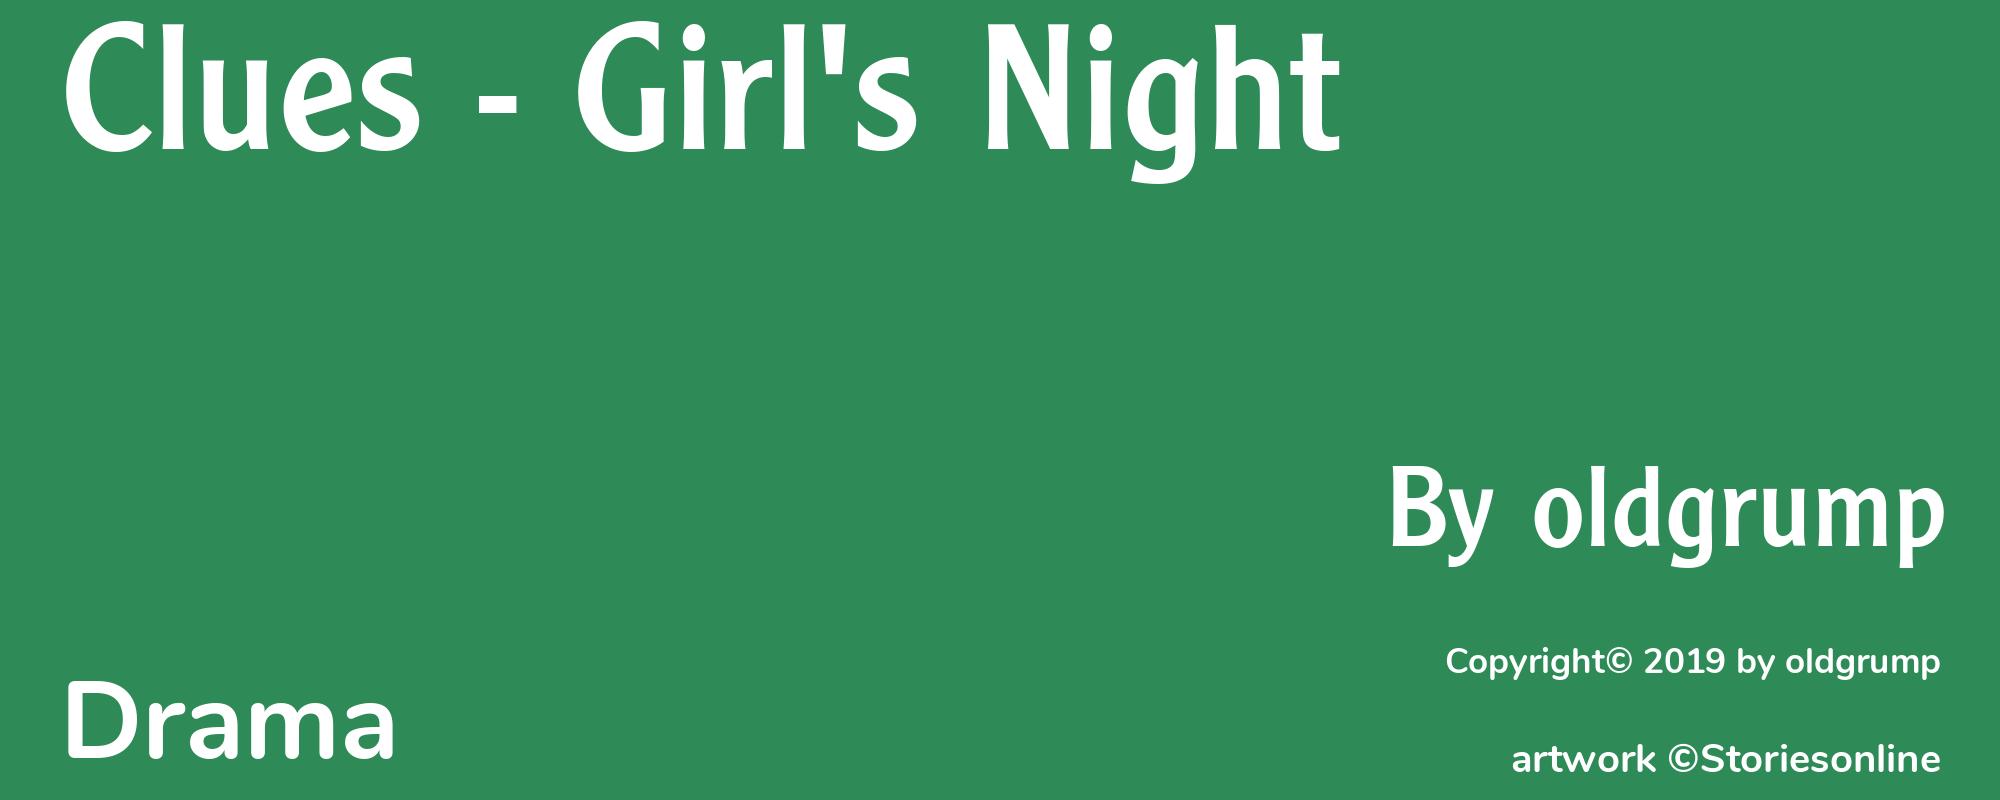 Clues - Girl's Night - Cover